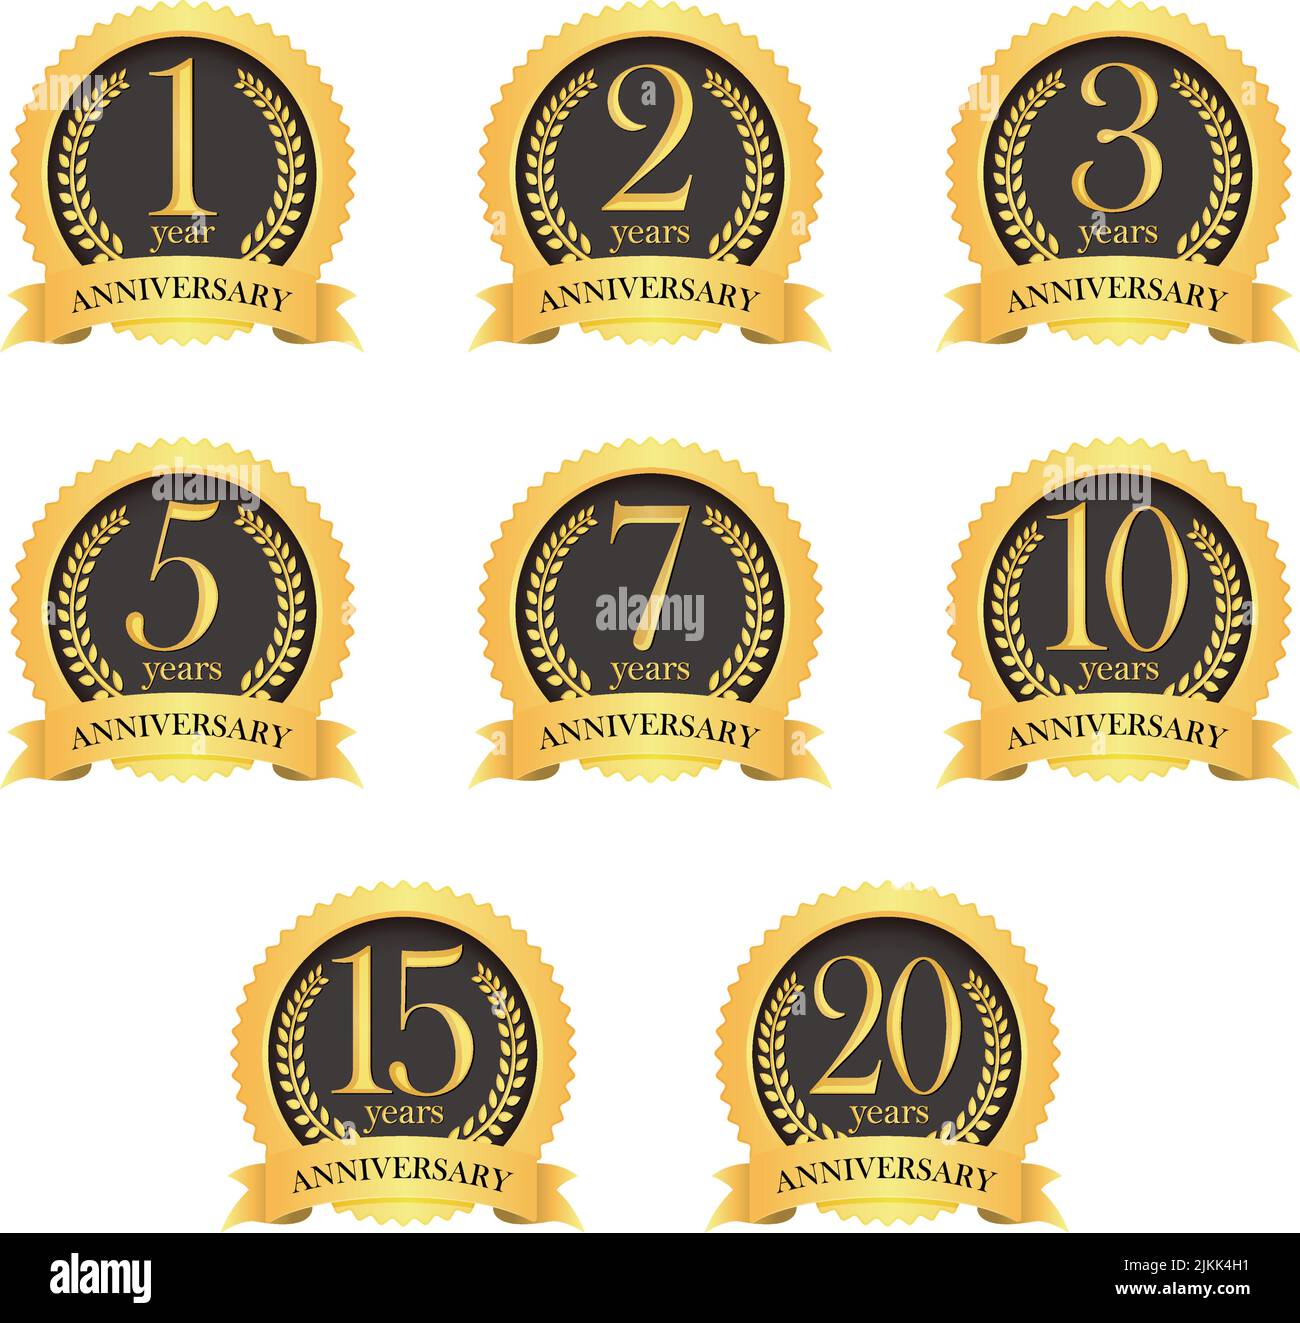 Golden anniversary medal icon set from 1st to 20th. Stock Vector